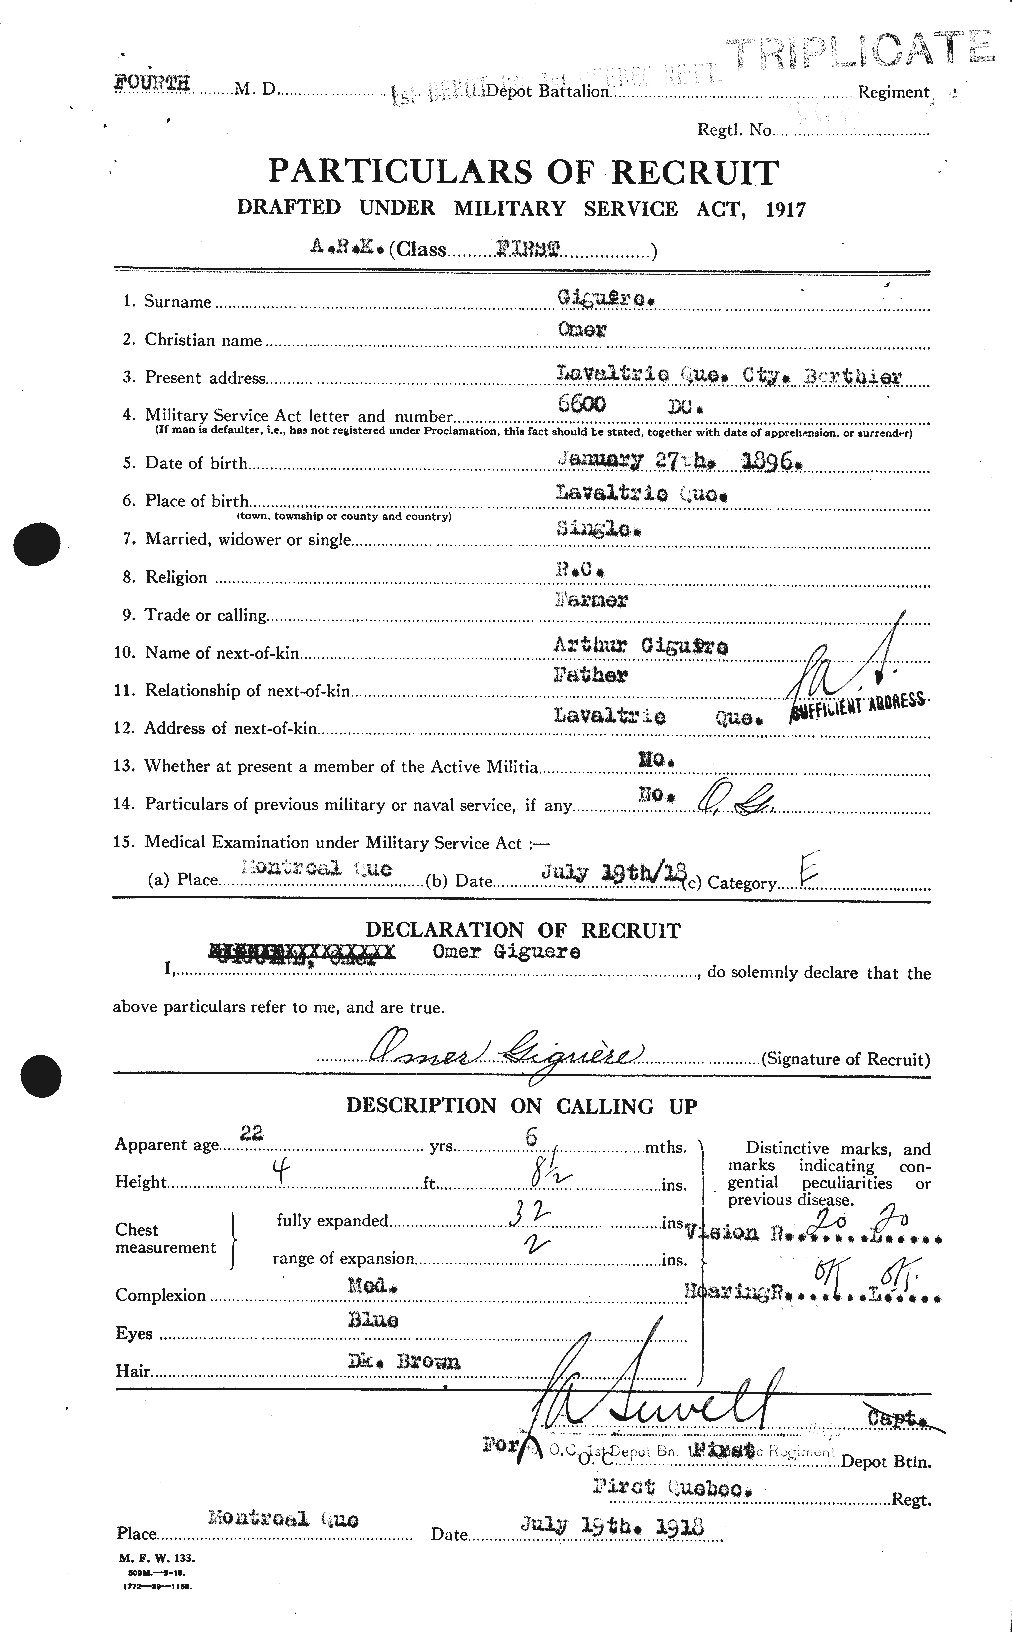 Personnel Records of the First World War - CEF 349091a